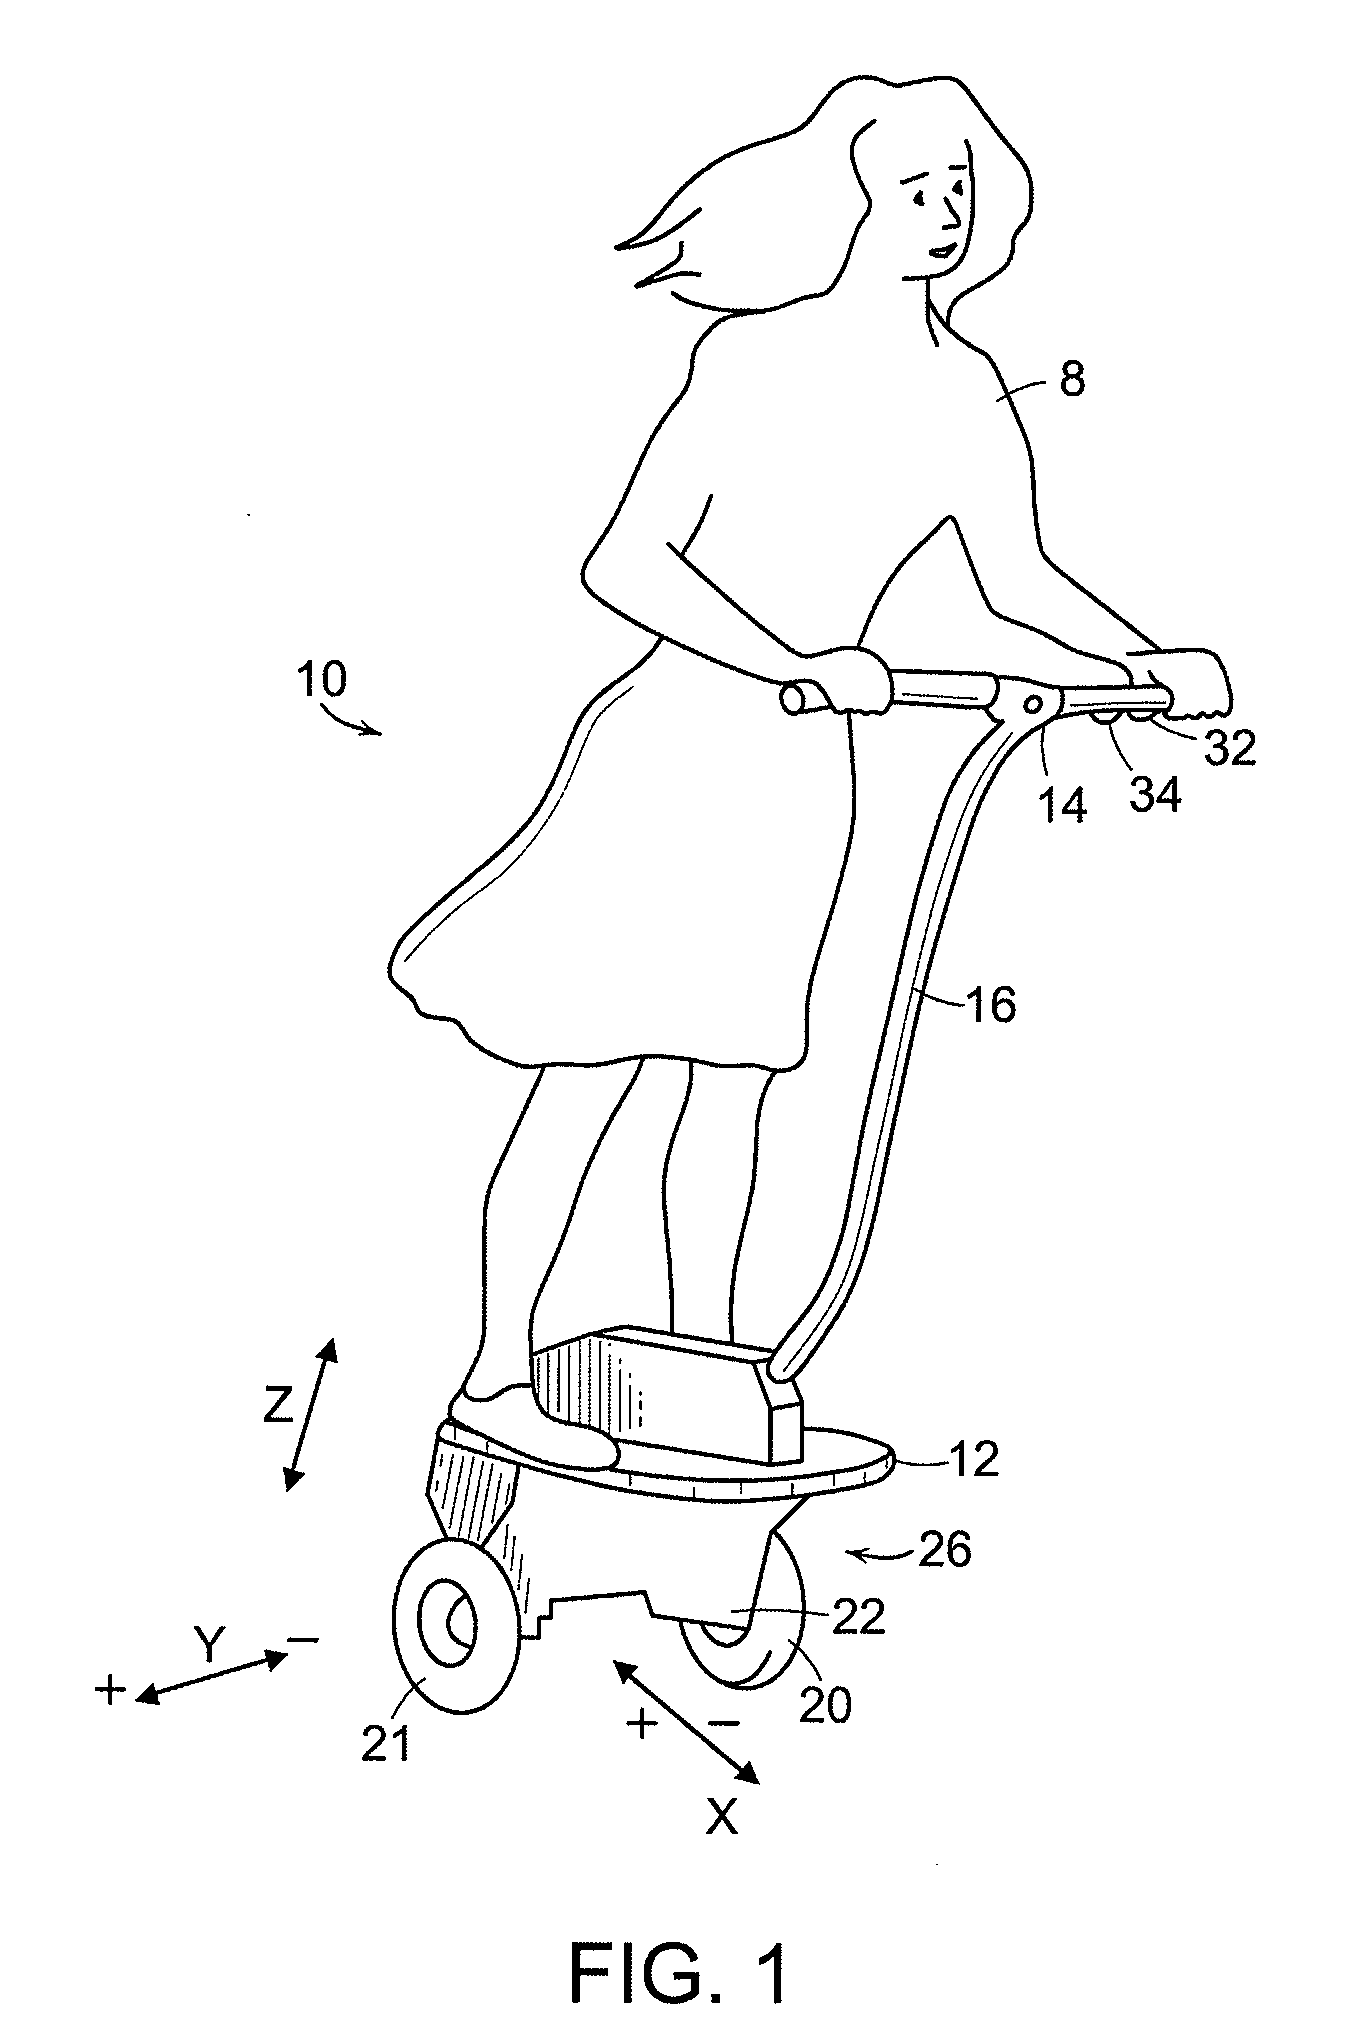 Methods and Apparatus for Moving a Vehicle Up or Down a Sloped Surface